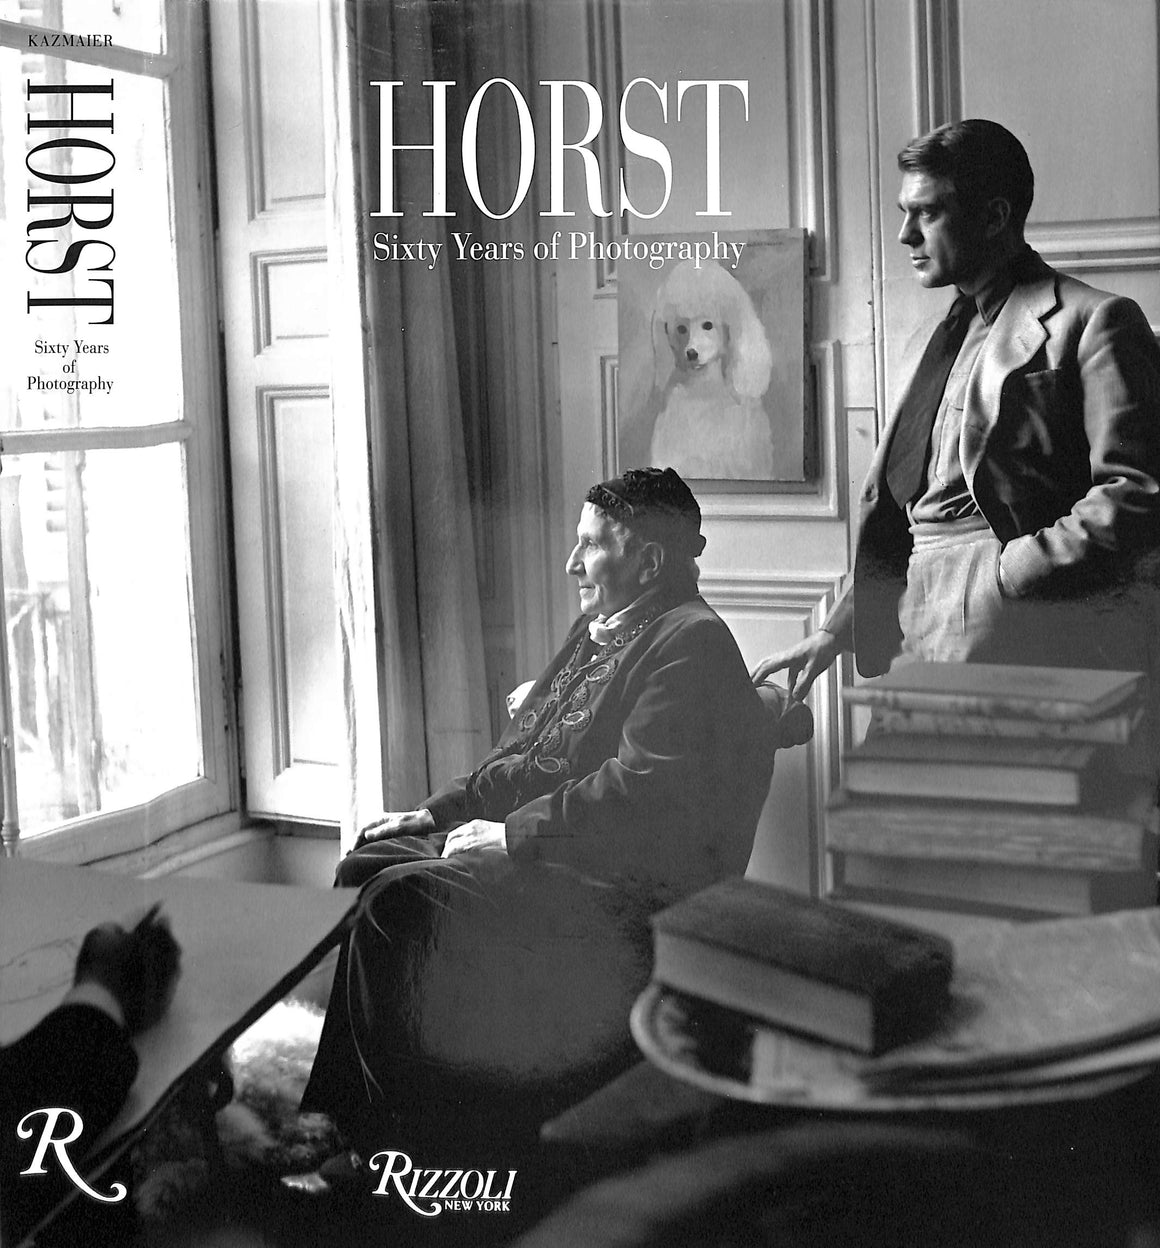 "Horst: Sixty Years Of Photography" 1991 KAZMAIER, Martin [text by]